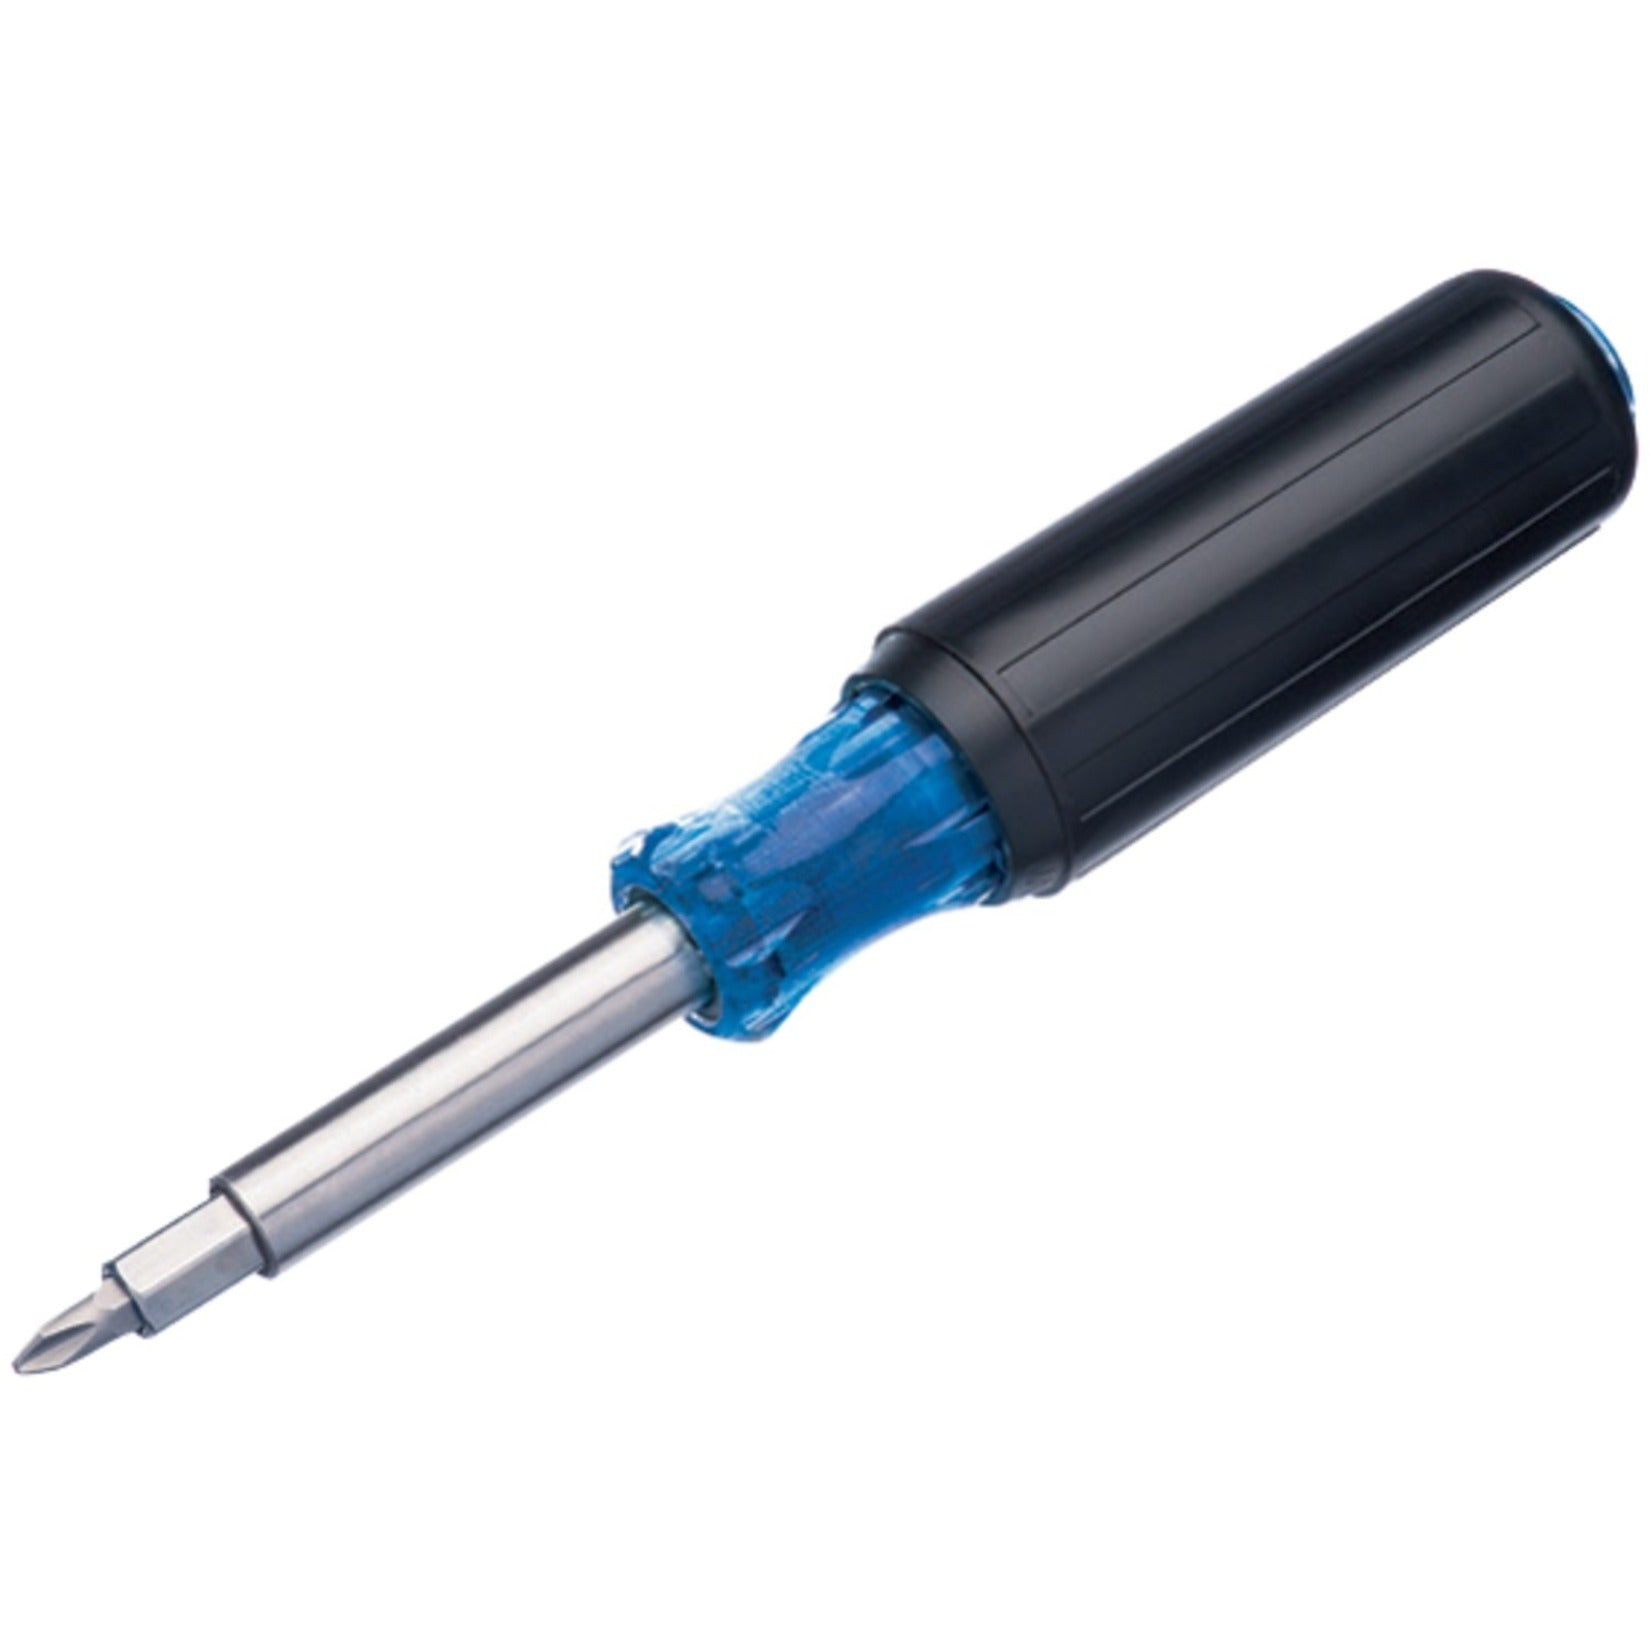 IDEAL 35-946 12-in-1 Multi-Bit Screwdriver & Nut Driver, Versatile and Convenient Tool for Various Tasks